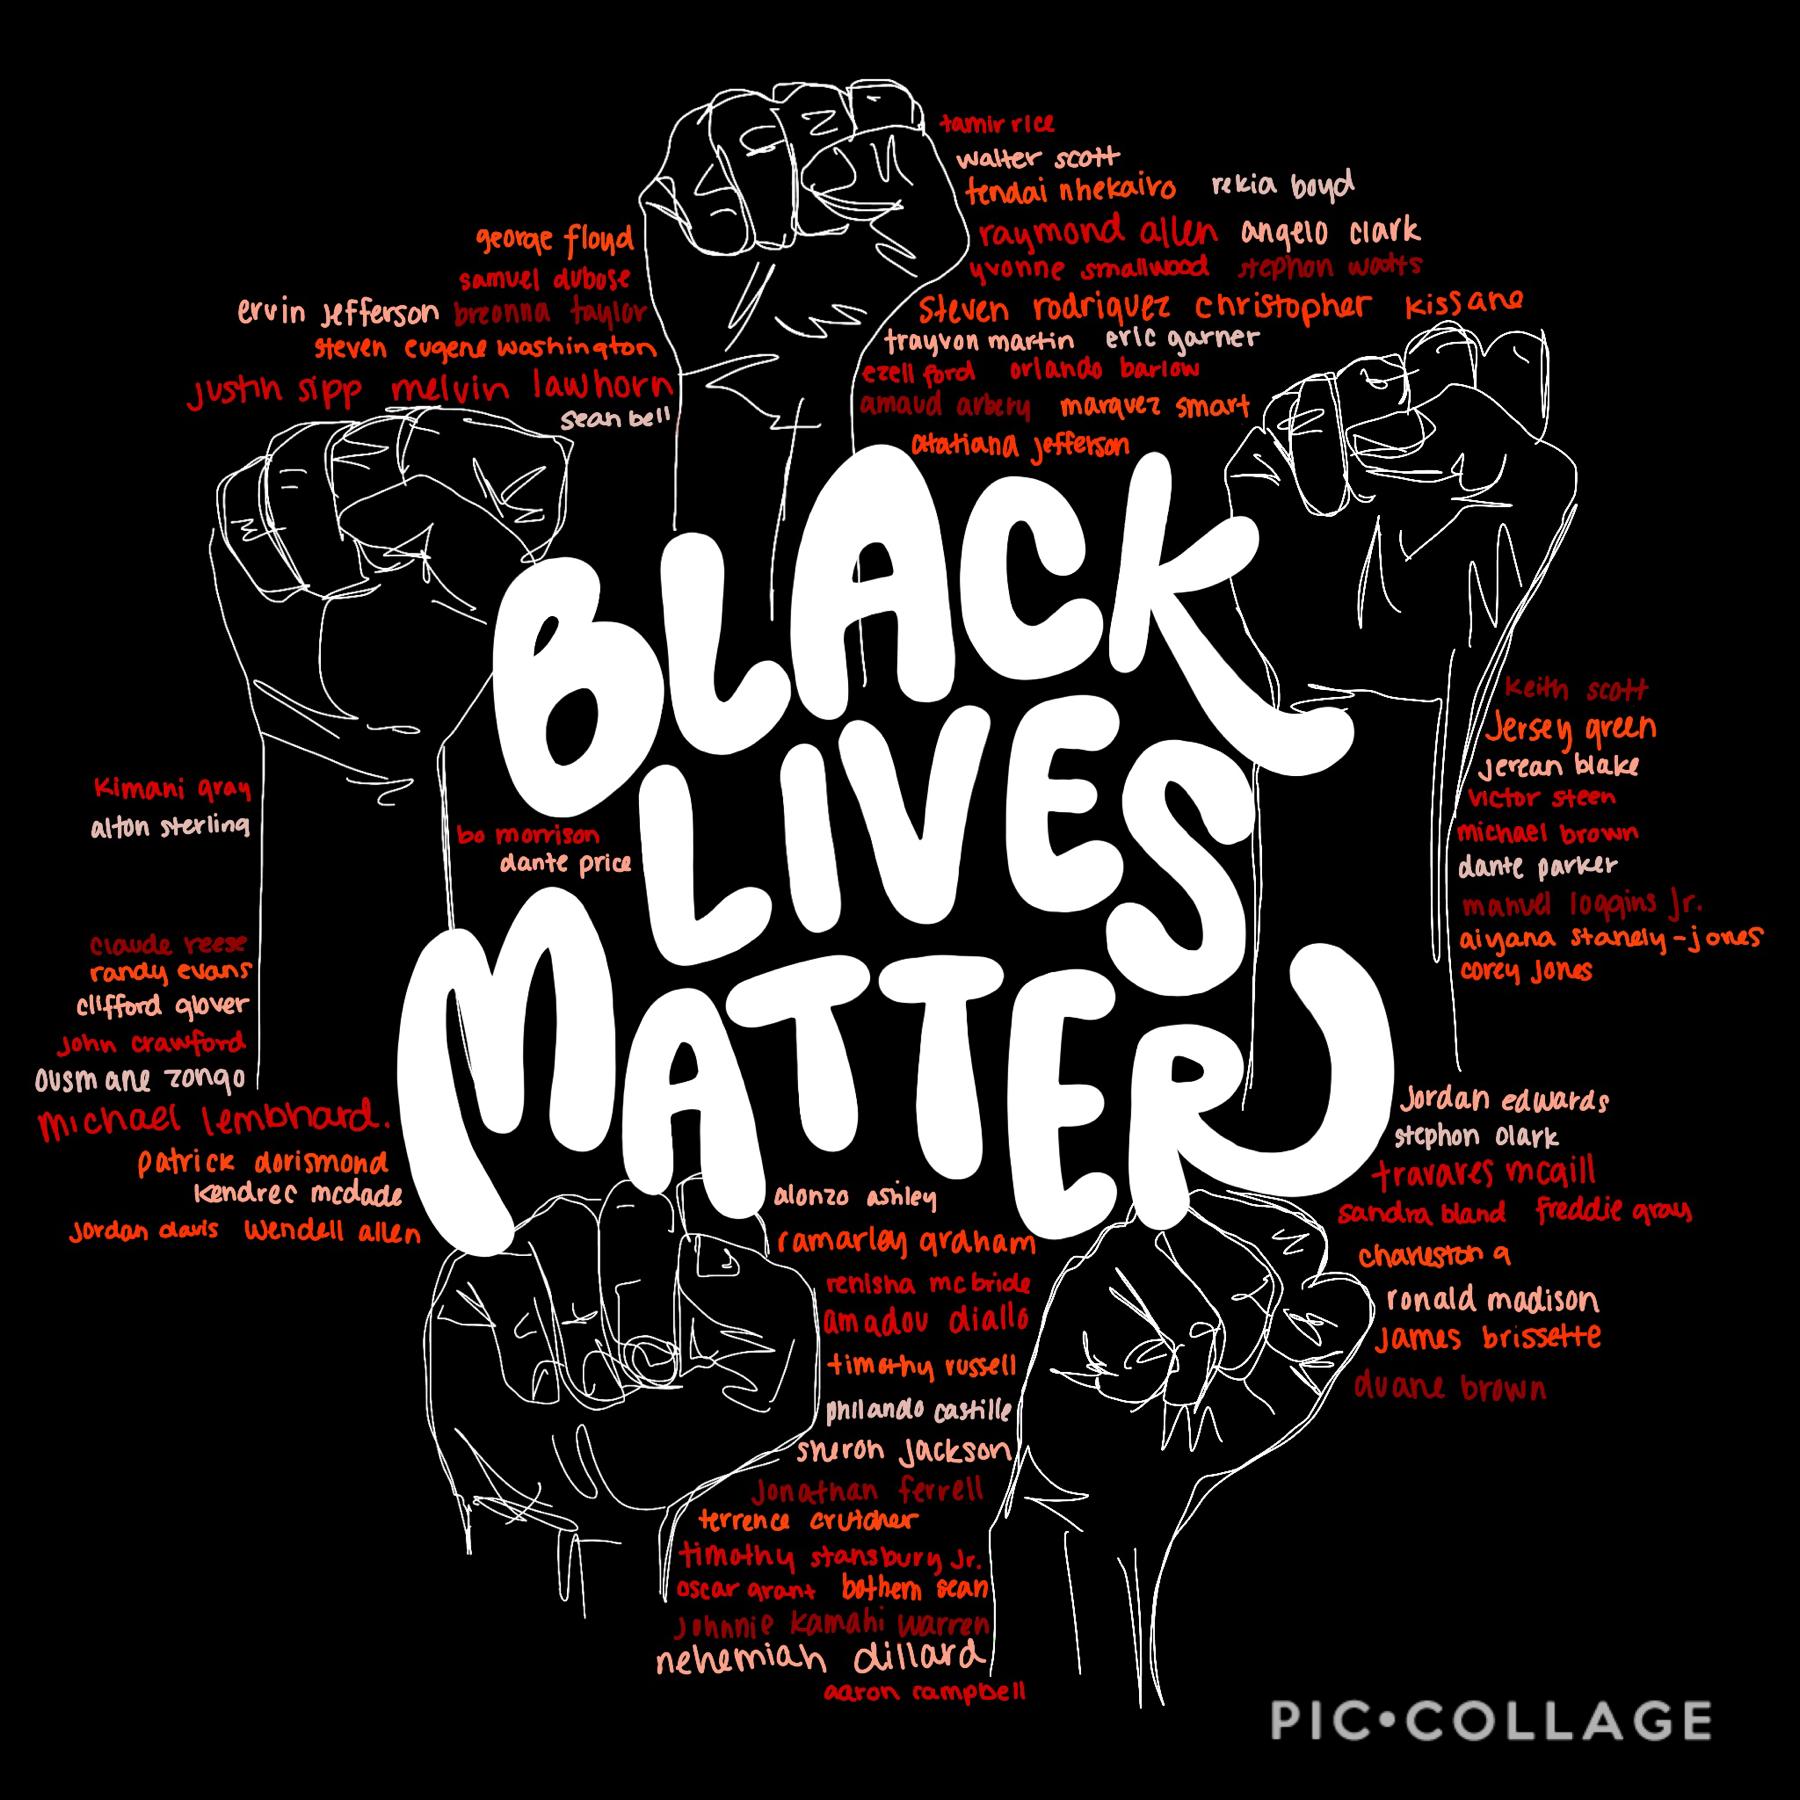 👇🏾👇🏿👇🏽
black lives matter !!!
this doesnt look great but i needed to make something. 
please stay safe, smart, and informed!
these are scary times. 